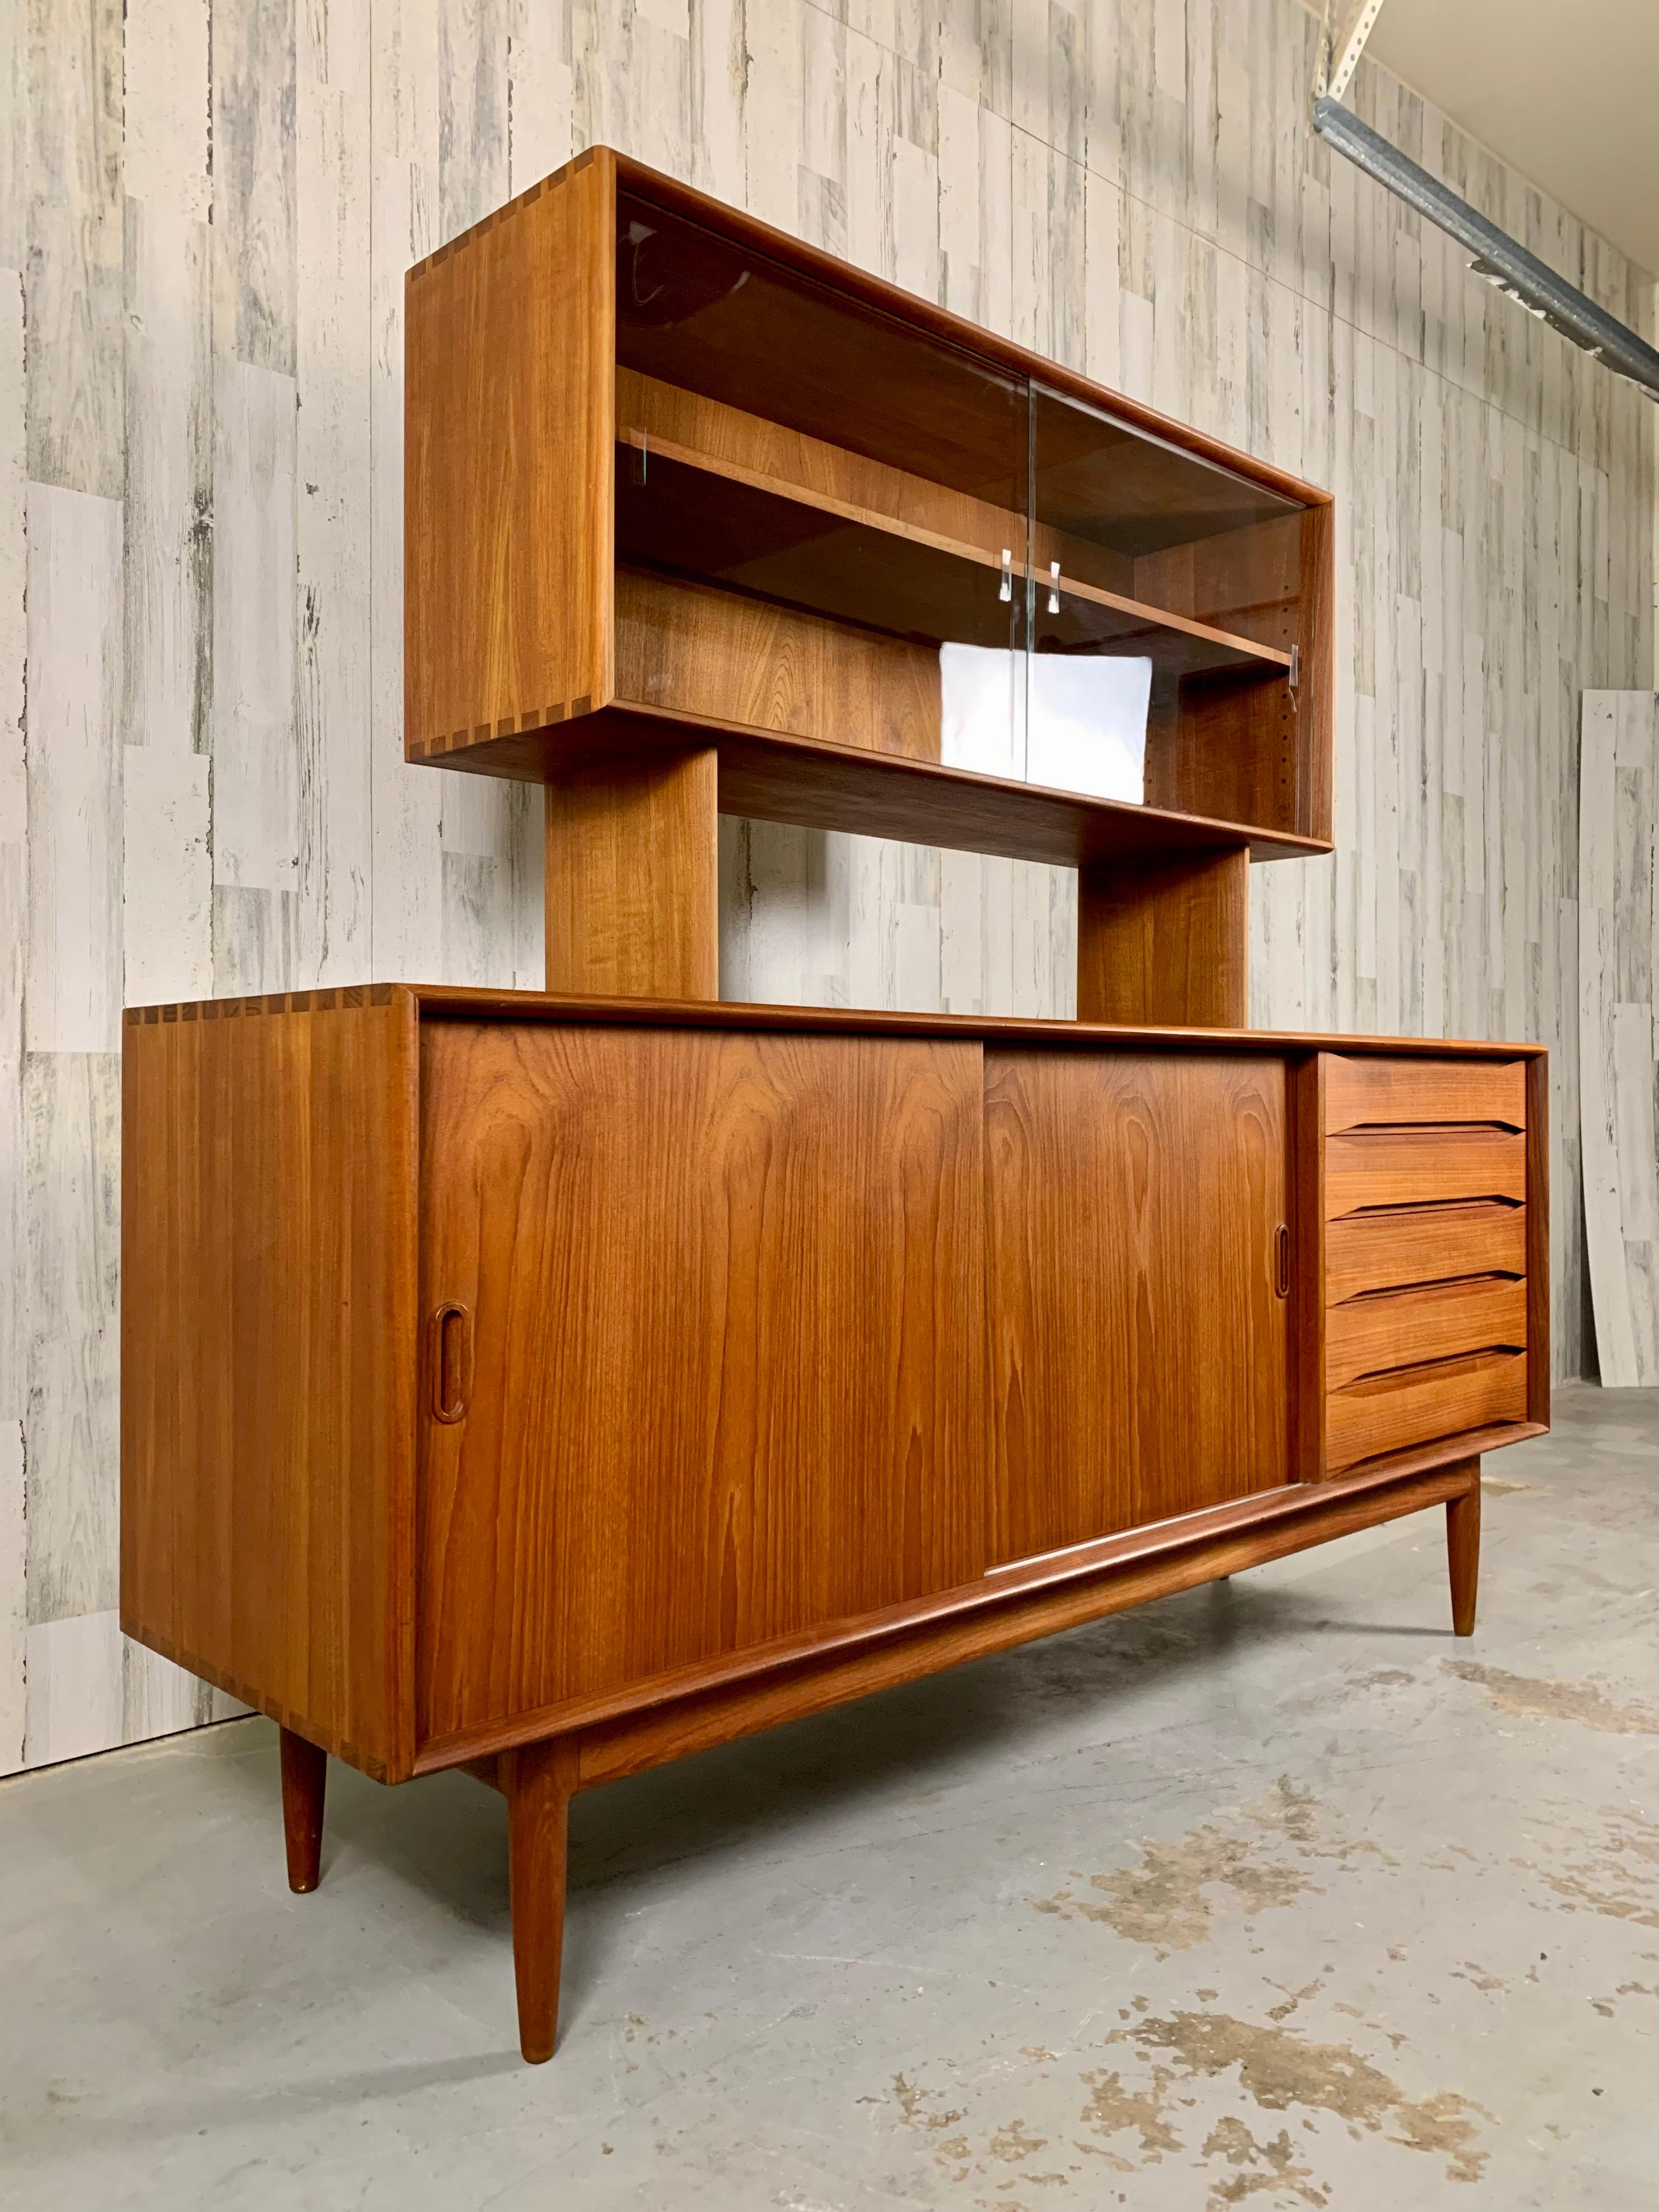 Danish modern solid teak credenza with hutch by Johannes Aasbjerg with dovetailed corners on the case and drawers
Also two sliding doors that have adjustable shelves inside. The back of the cabinet is finished so it can be floated in a room. Please